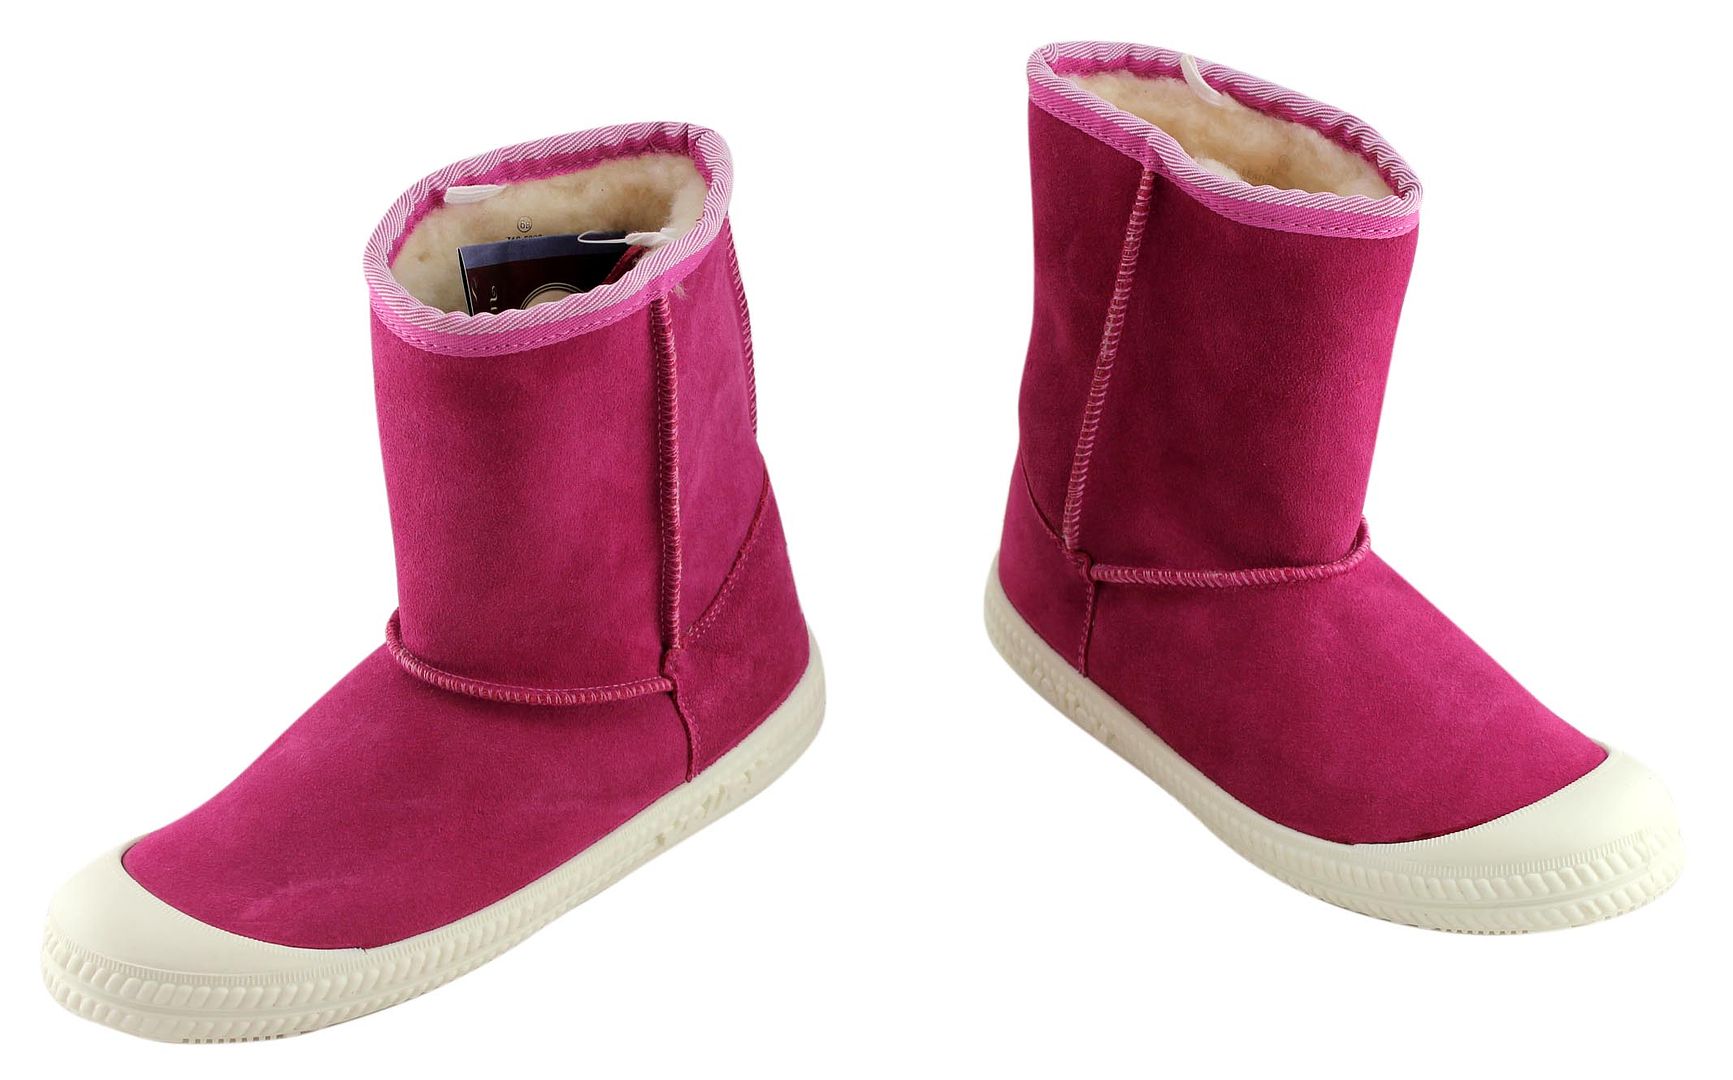 DUNLOP VOLLEY UGLY UGG LADIES SLIPPERS 